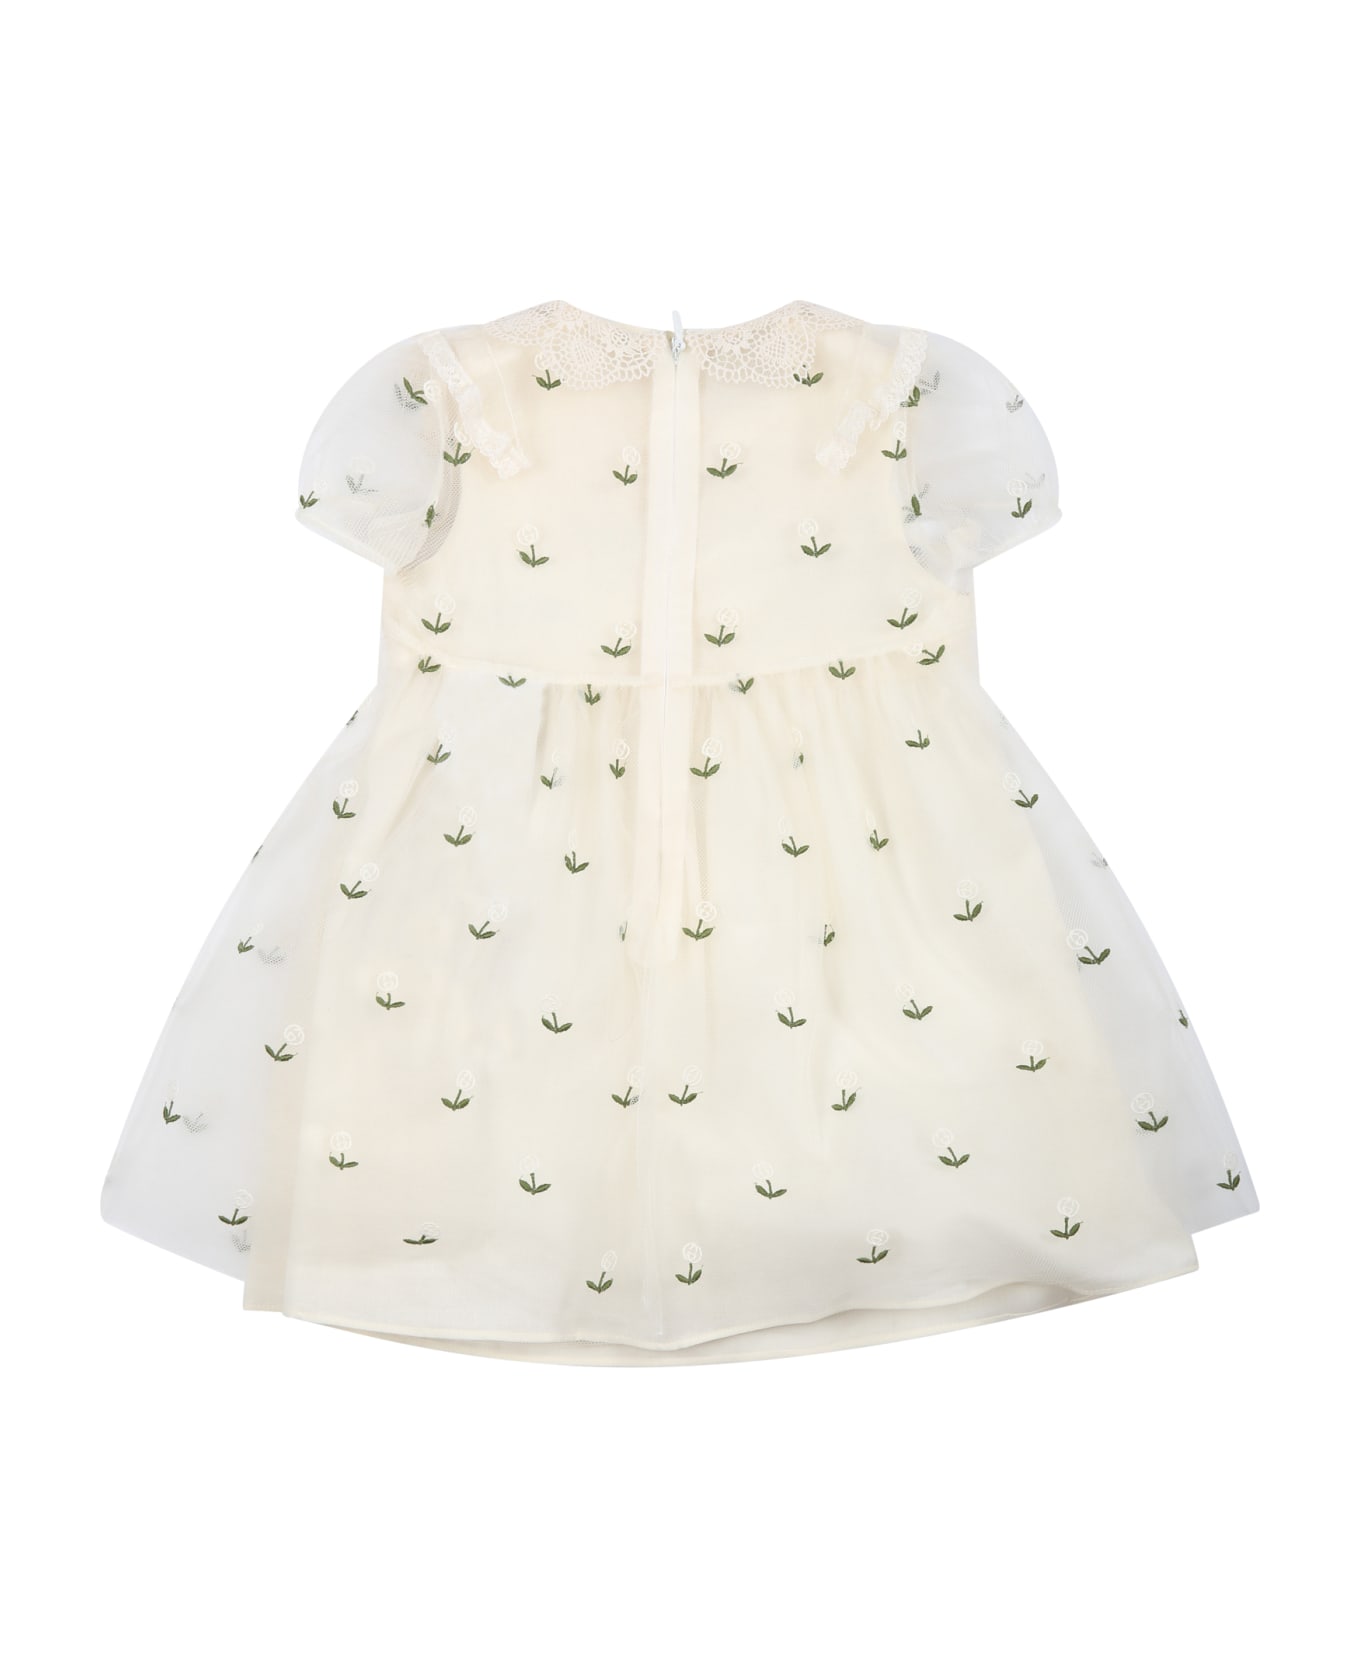 Gucci Ivory Dress For Baby Girl With All-over Embroidered Flowers And Logo Gg - Ivory ウェア